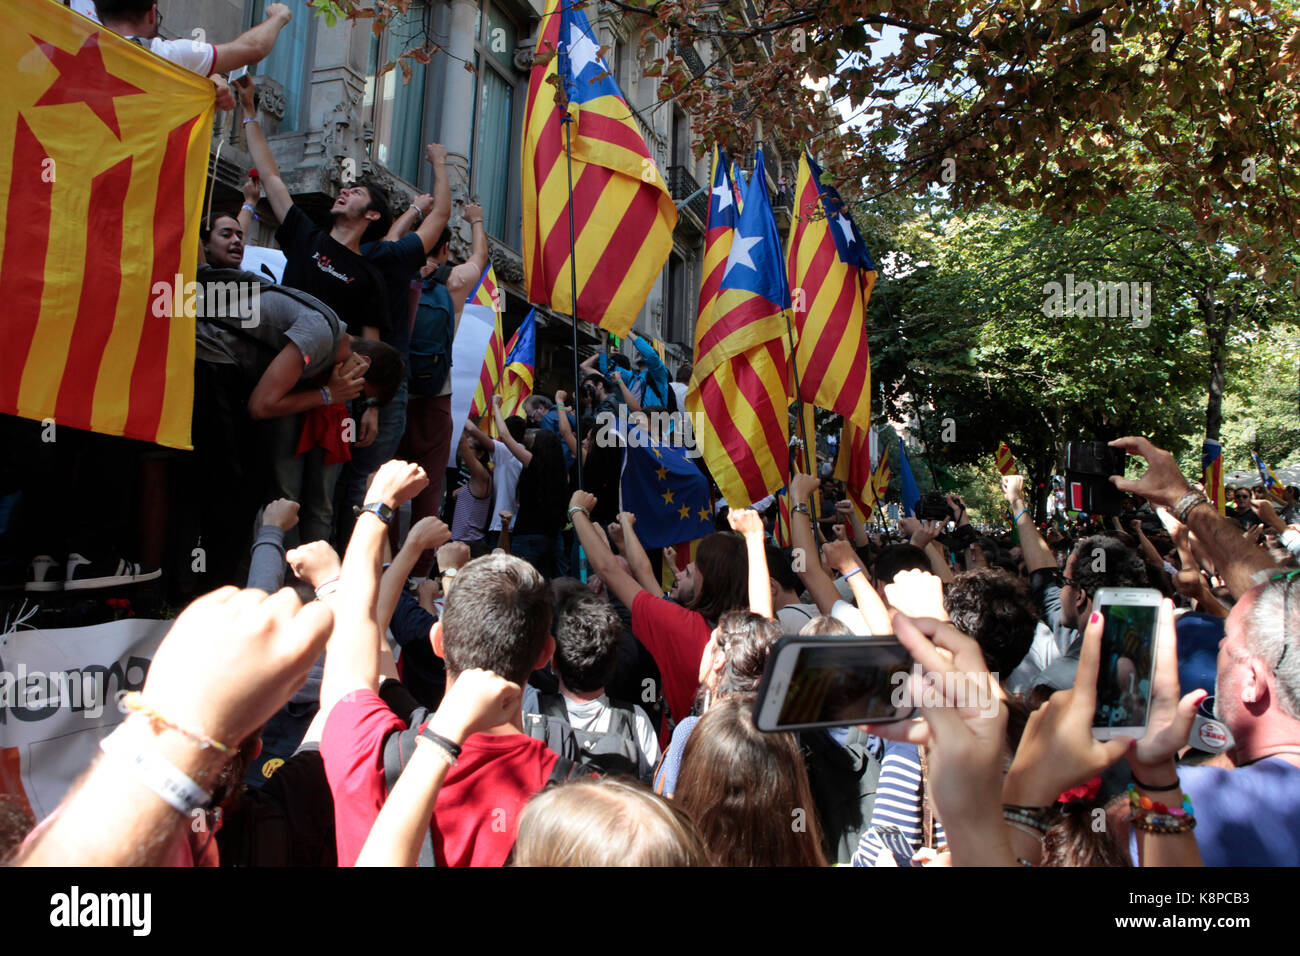 Barcelona, Spain. . 20th Sep, 2017. BARCELONA, CATALONIA, SPAIN Supporters of the referendum for Catalan independence hold a demonstration outside the Economic council building in Rambla de Catalunya, after Spain's Guardia Civil police had detained 14 Catalan officials and raided regional government ministries involved in organising a banned independence vote, due for the 1st October 2017. Credit: rich bowen/Alamy Live News Stock Photo